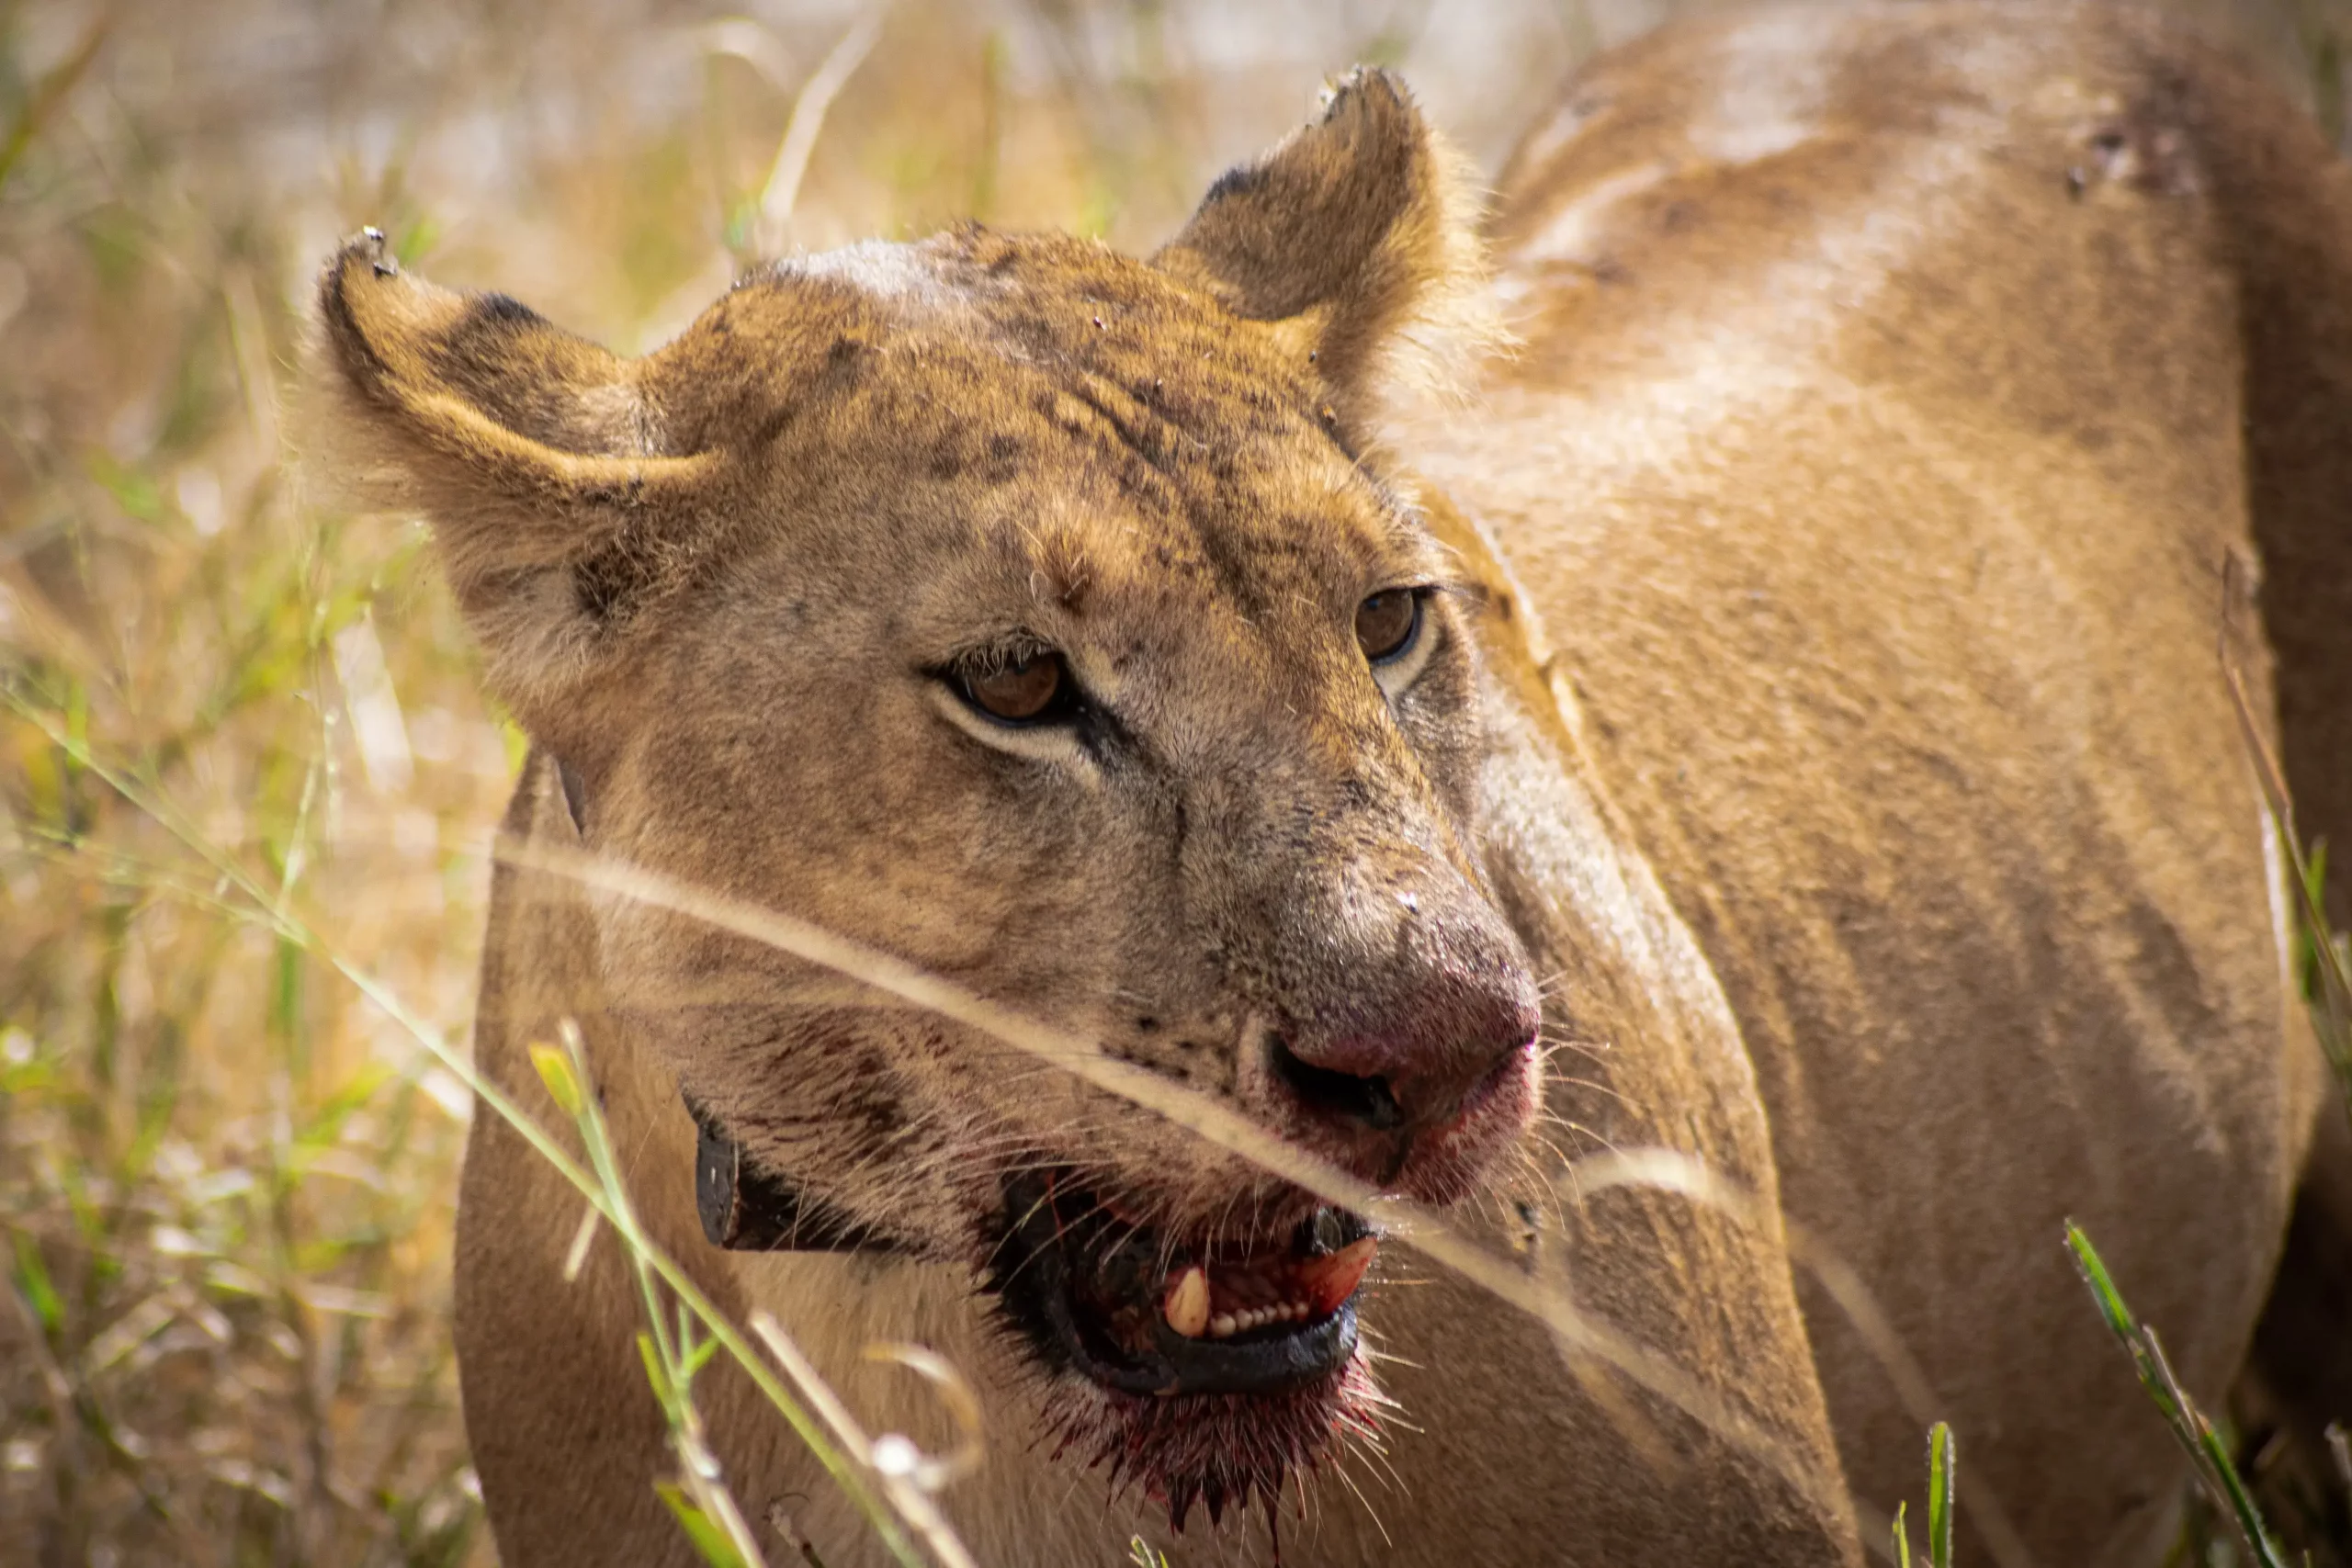 aggressive lioness roaring after having freshly hunted prey